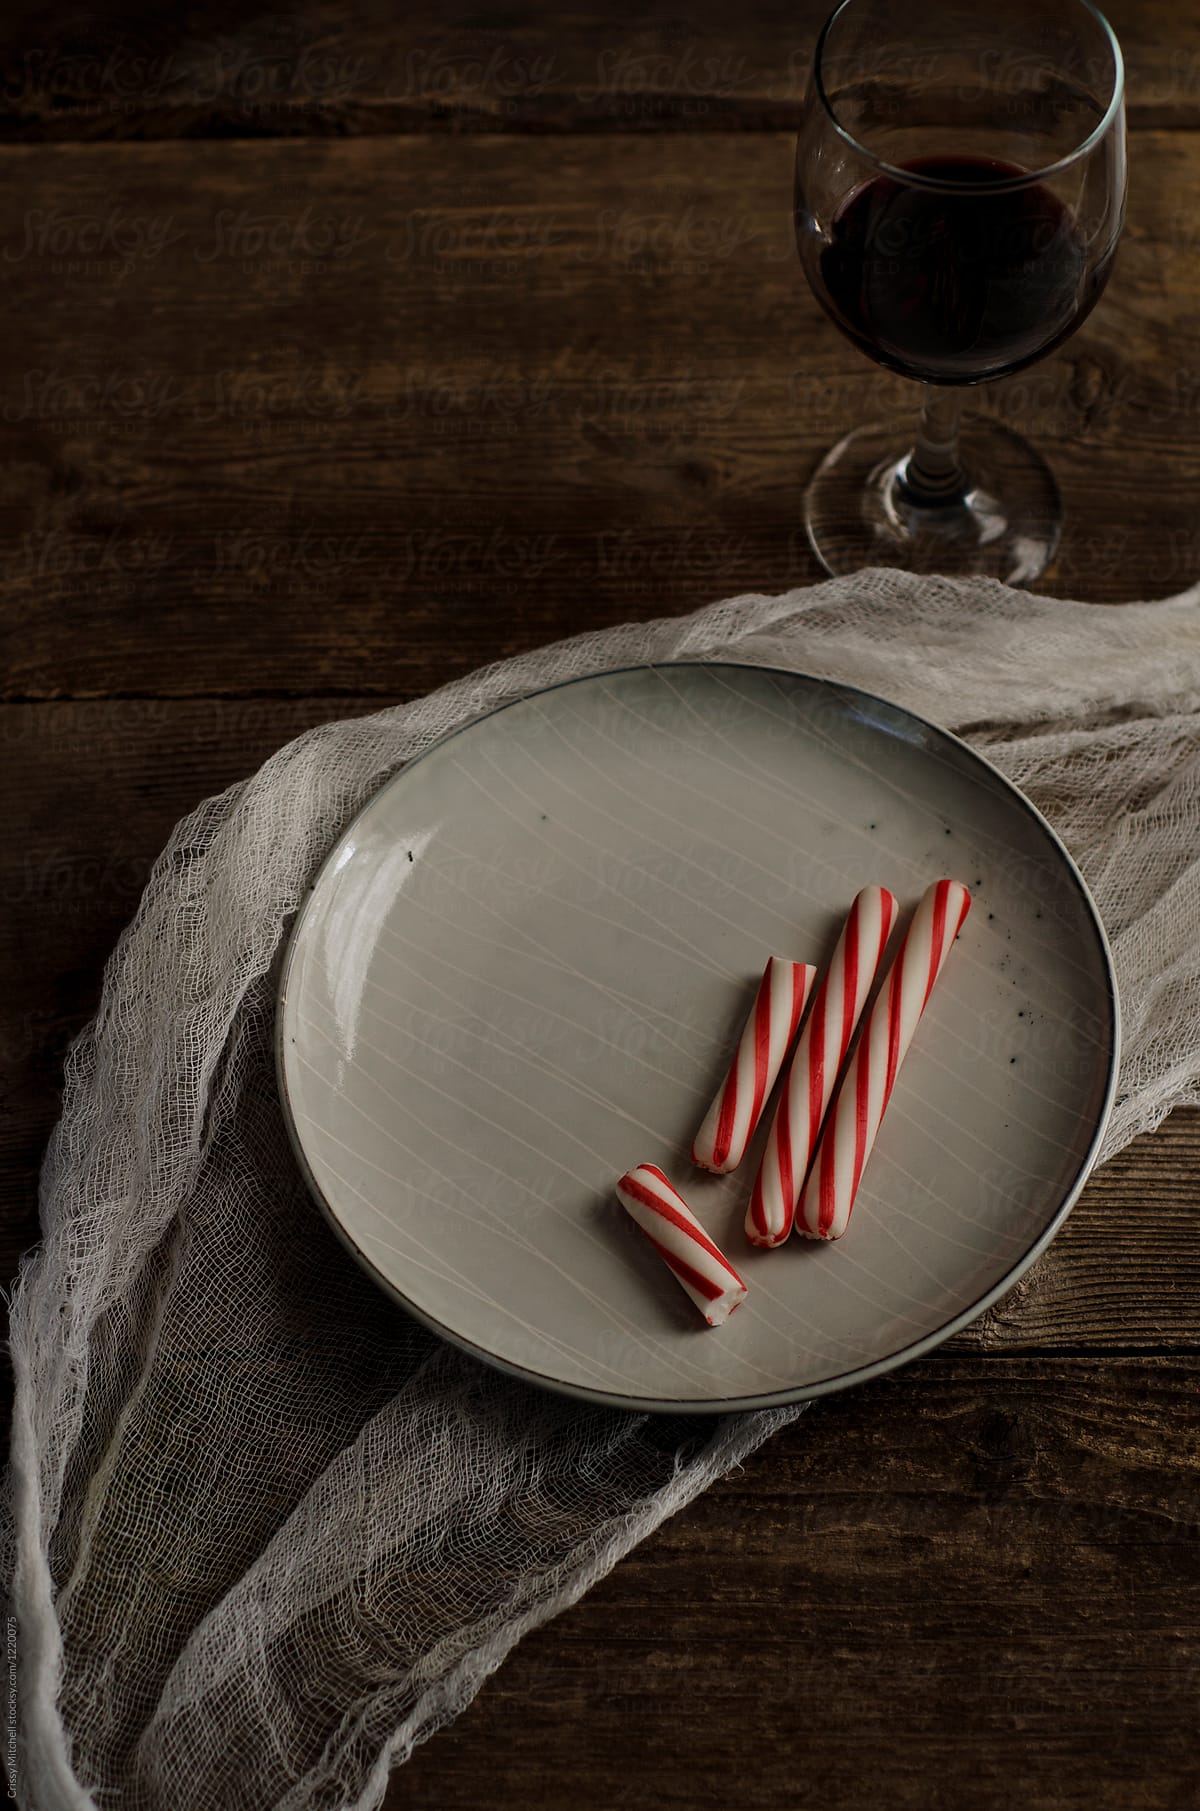 peppermint sticks and wine